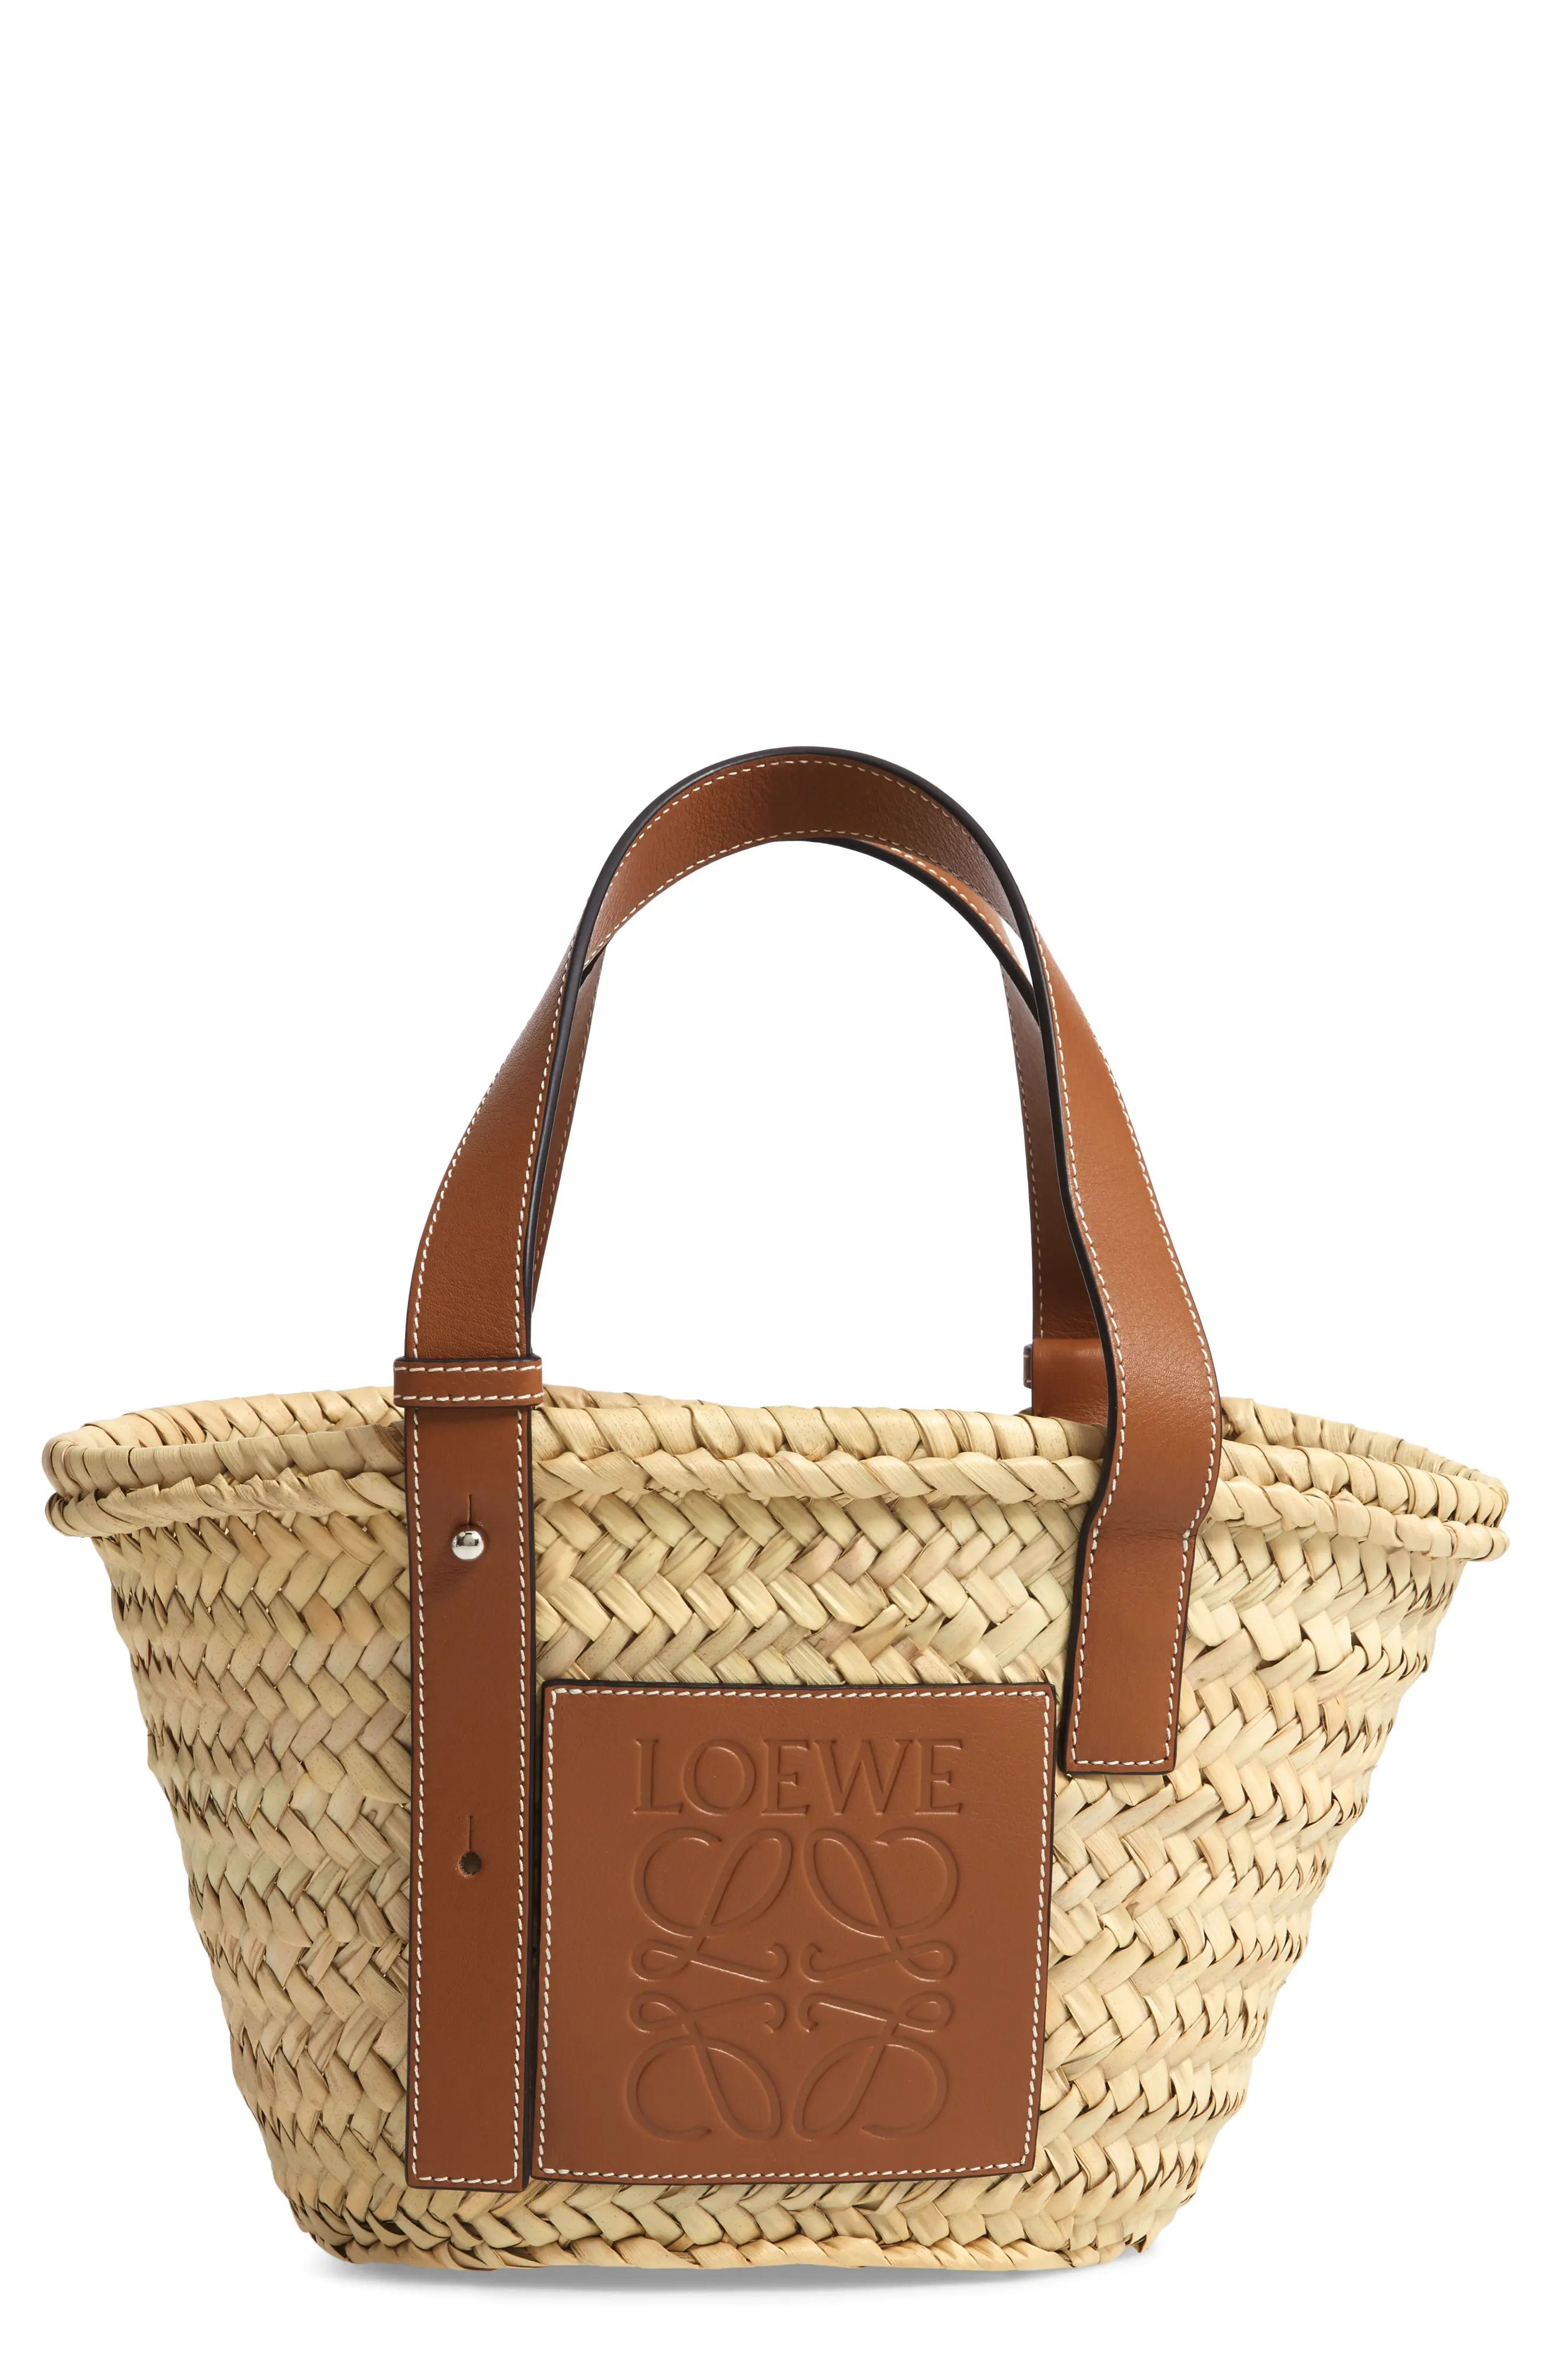 Loewe Small Logo Straw Tote in Natural/Tan at Nordstrom | Nordstrom